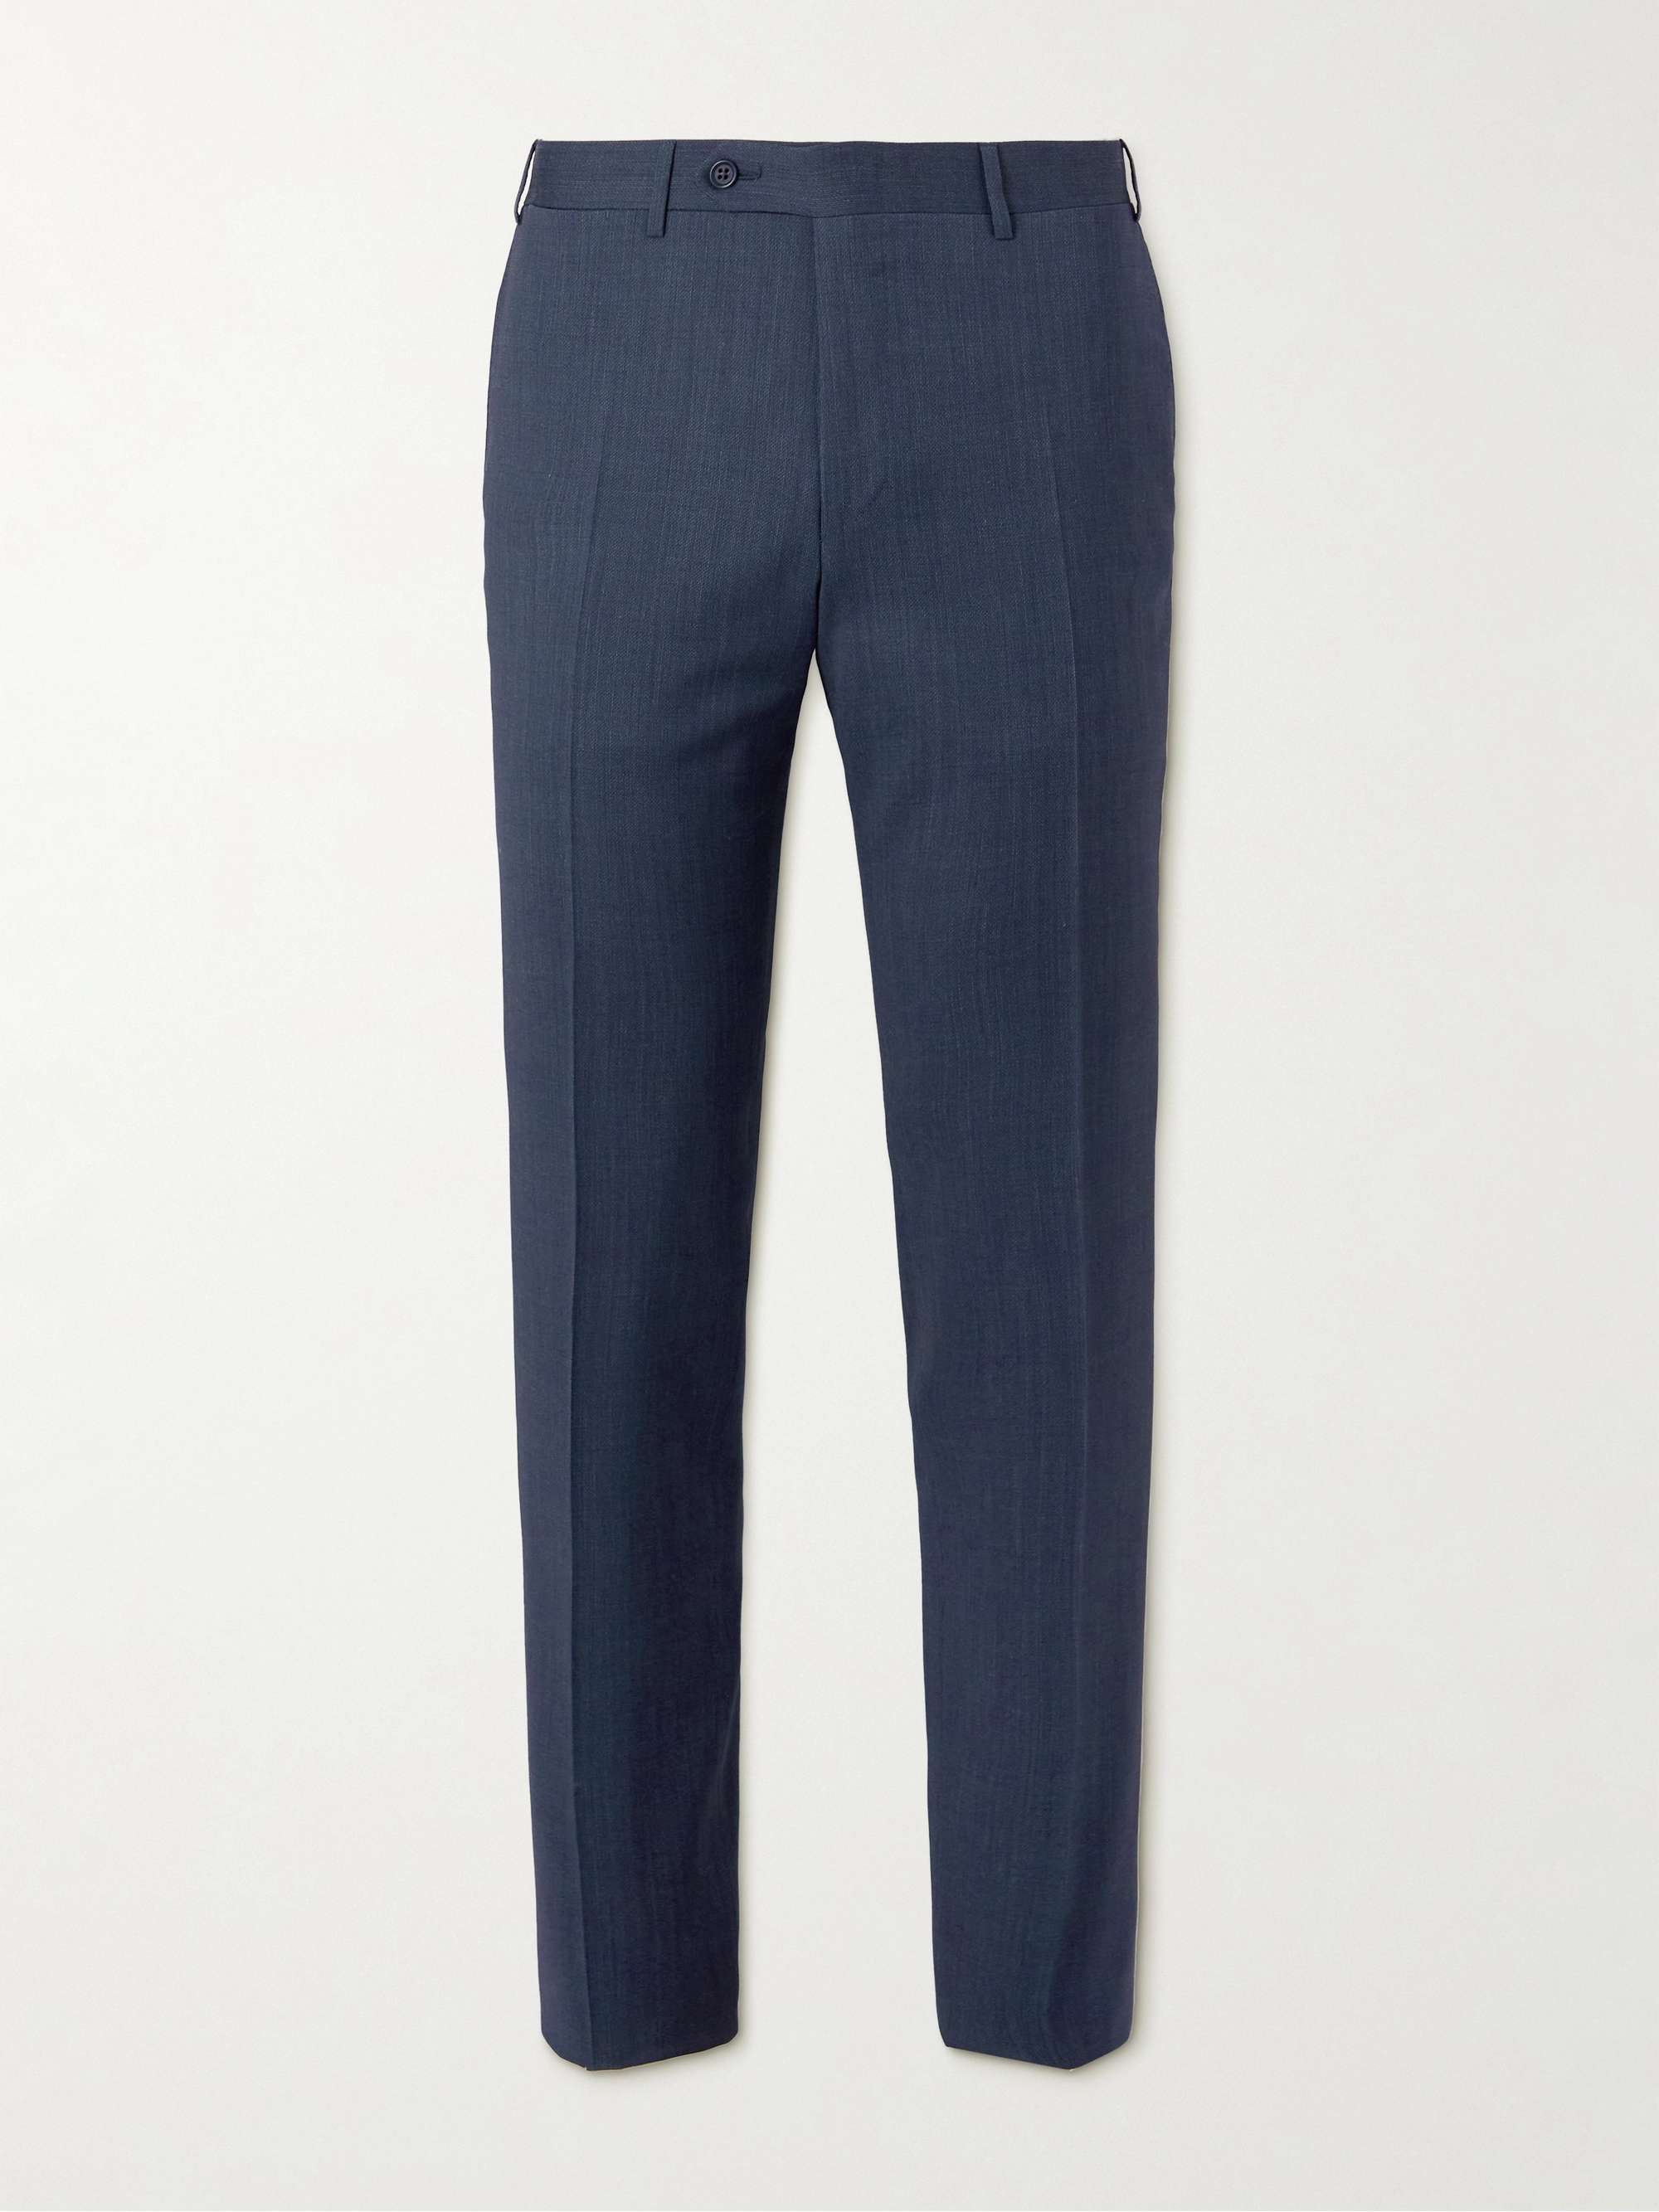 CANALI Slim-Fit Straight-Leg Wool Suit Trousers for Men | MR PORTER